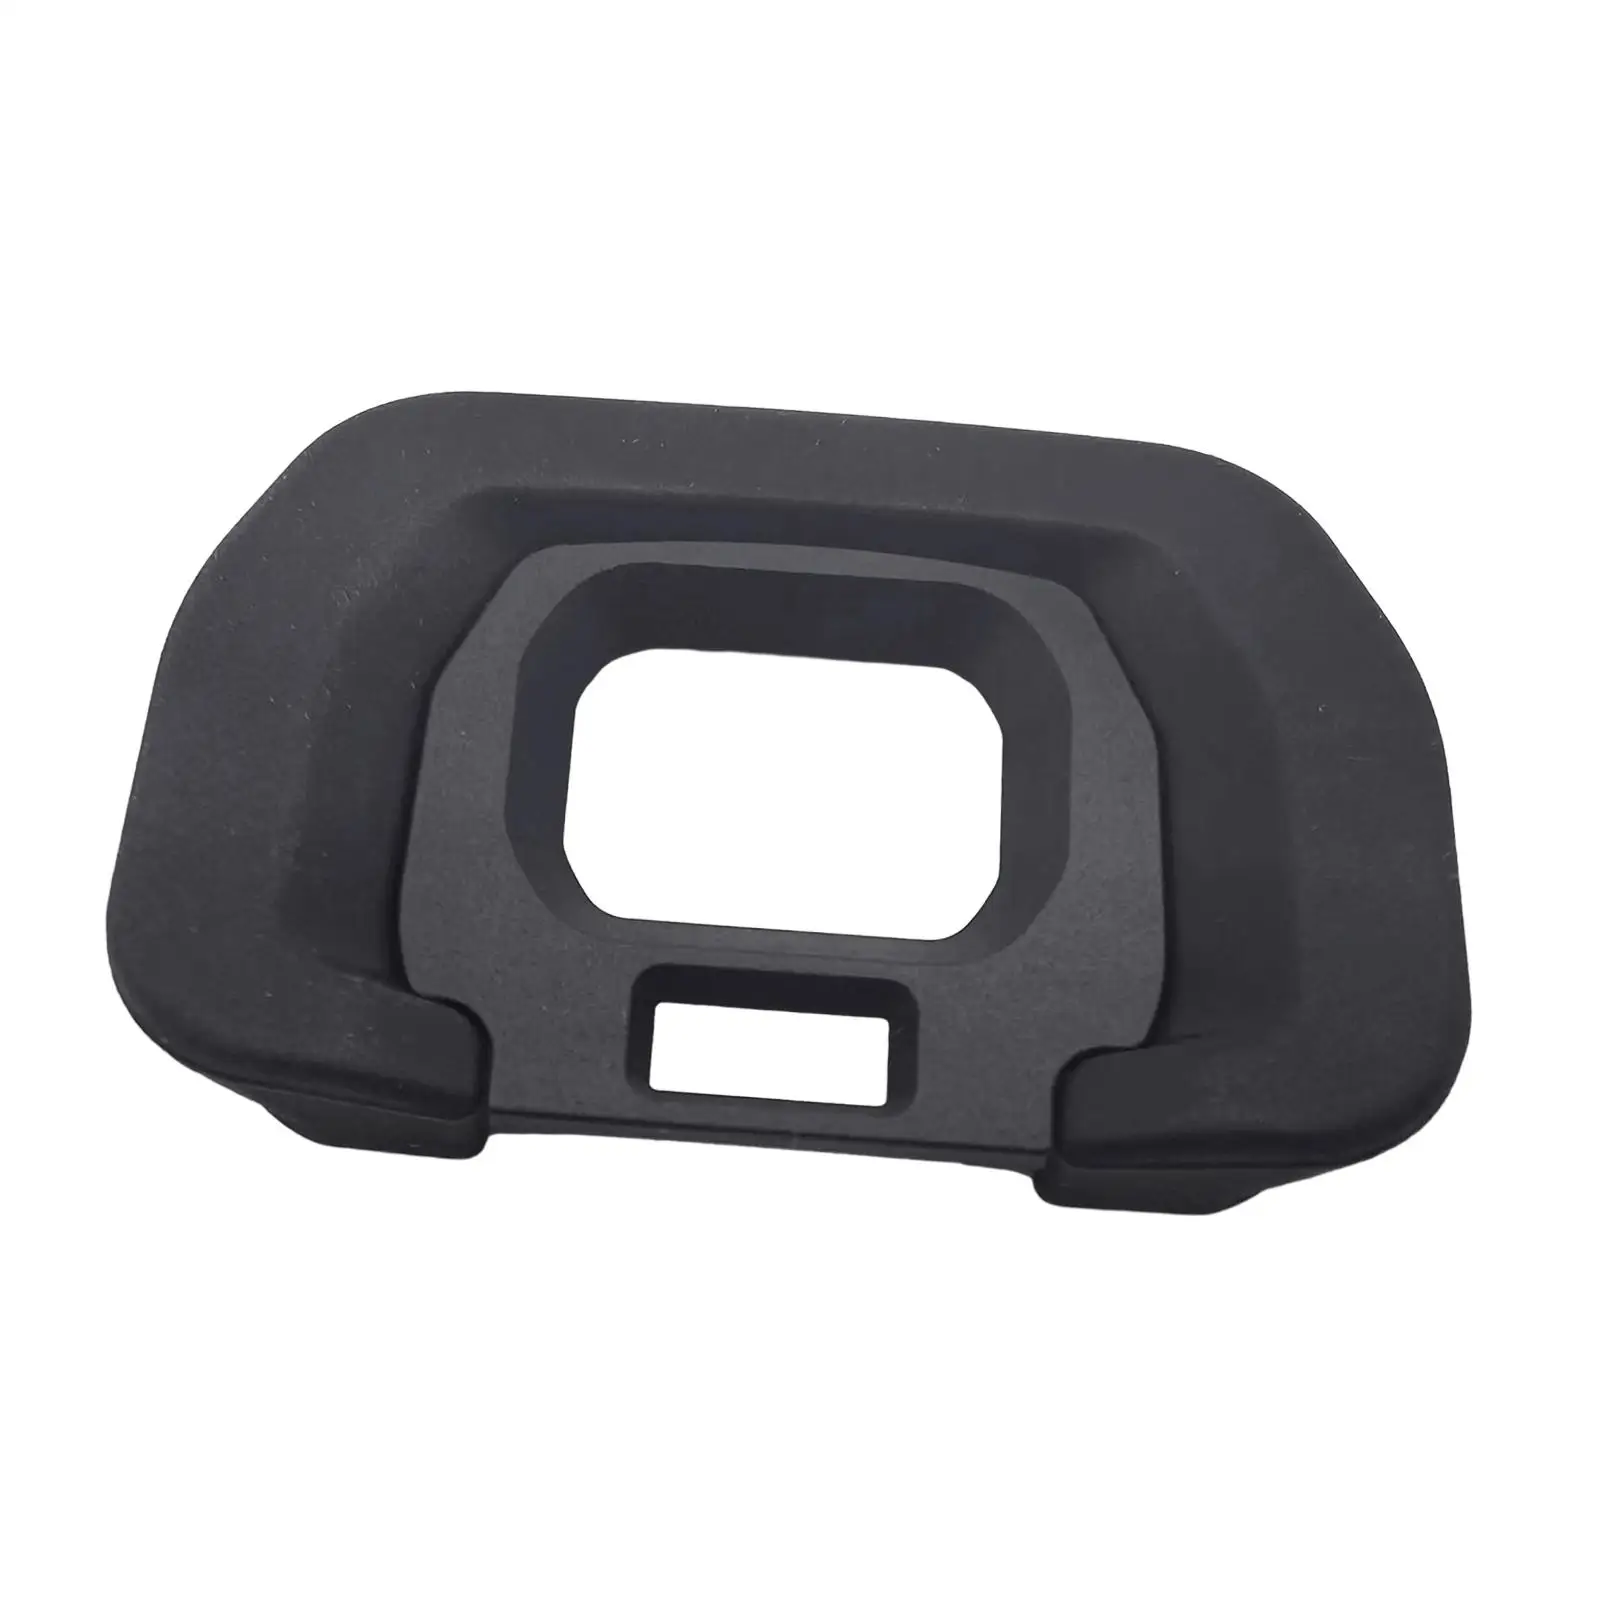 Viewfinder Eyepiece Eyecup Camera Parts Professional Camera Eyes Patch Eyepiece Eye Cup for Dc-gh5 Replacement Parts Accessories